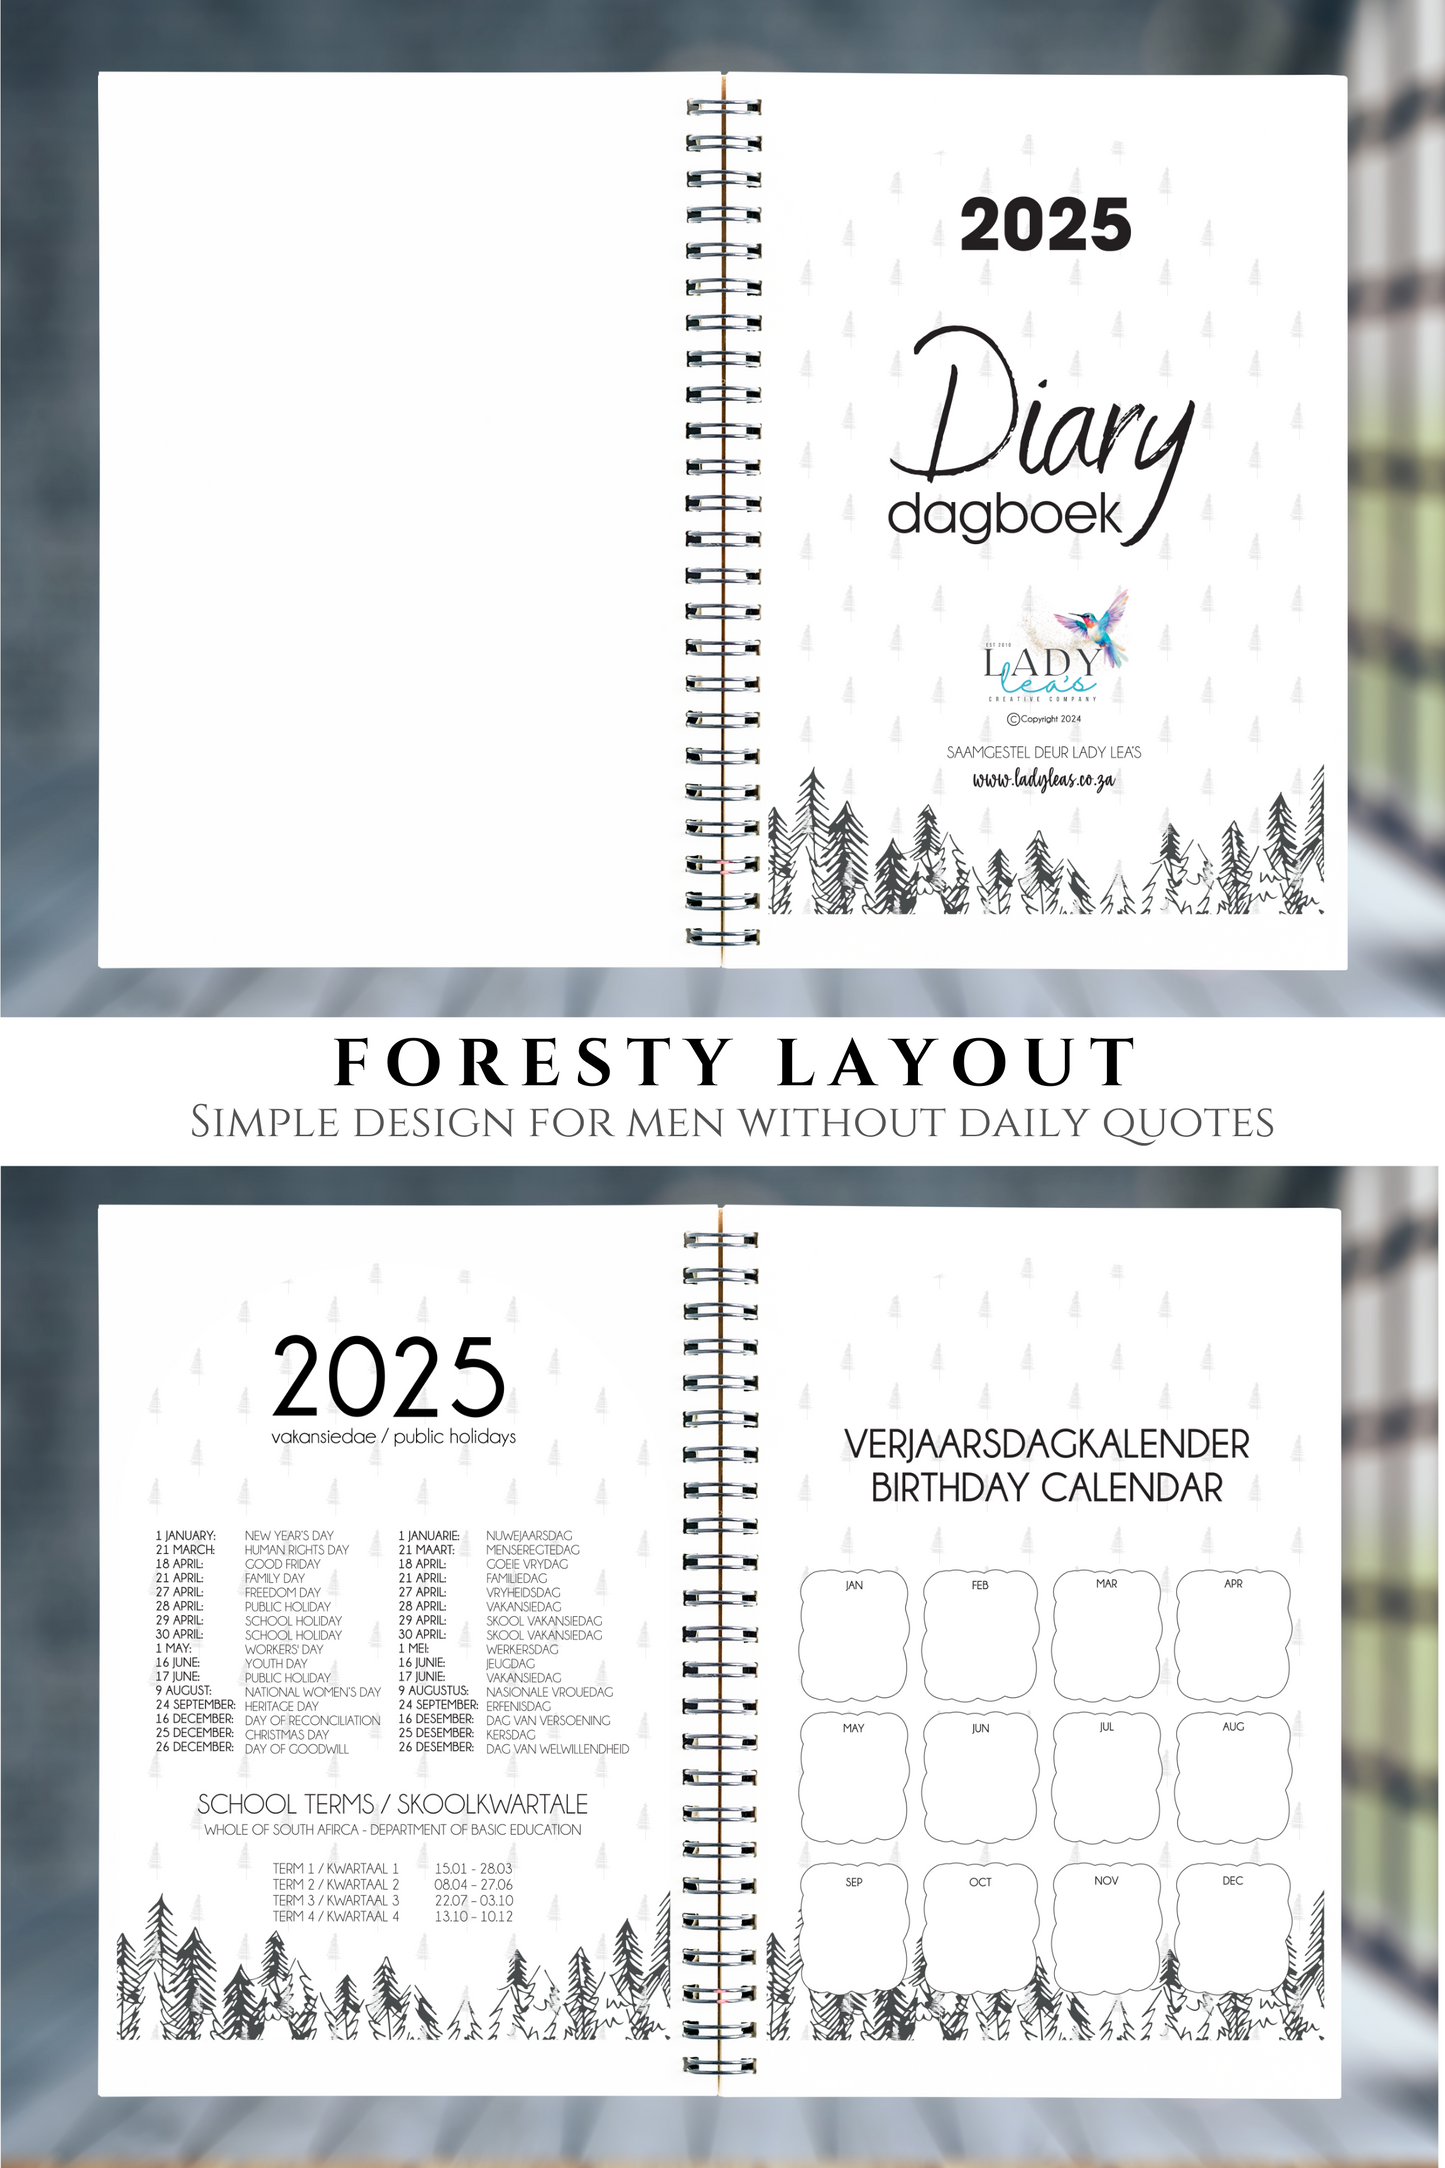 LADY OLIVE DIARY 2025